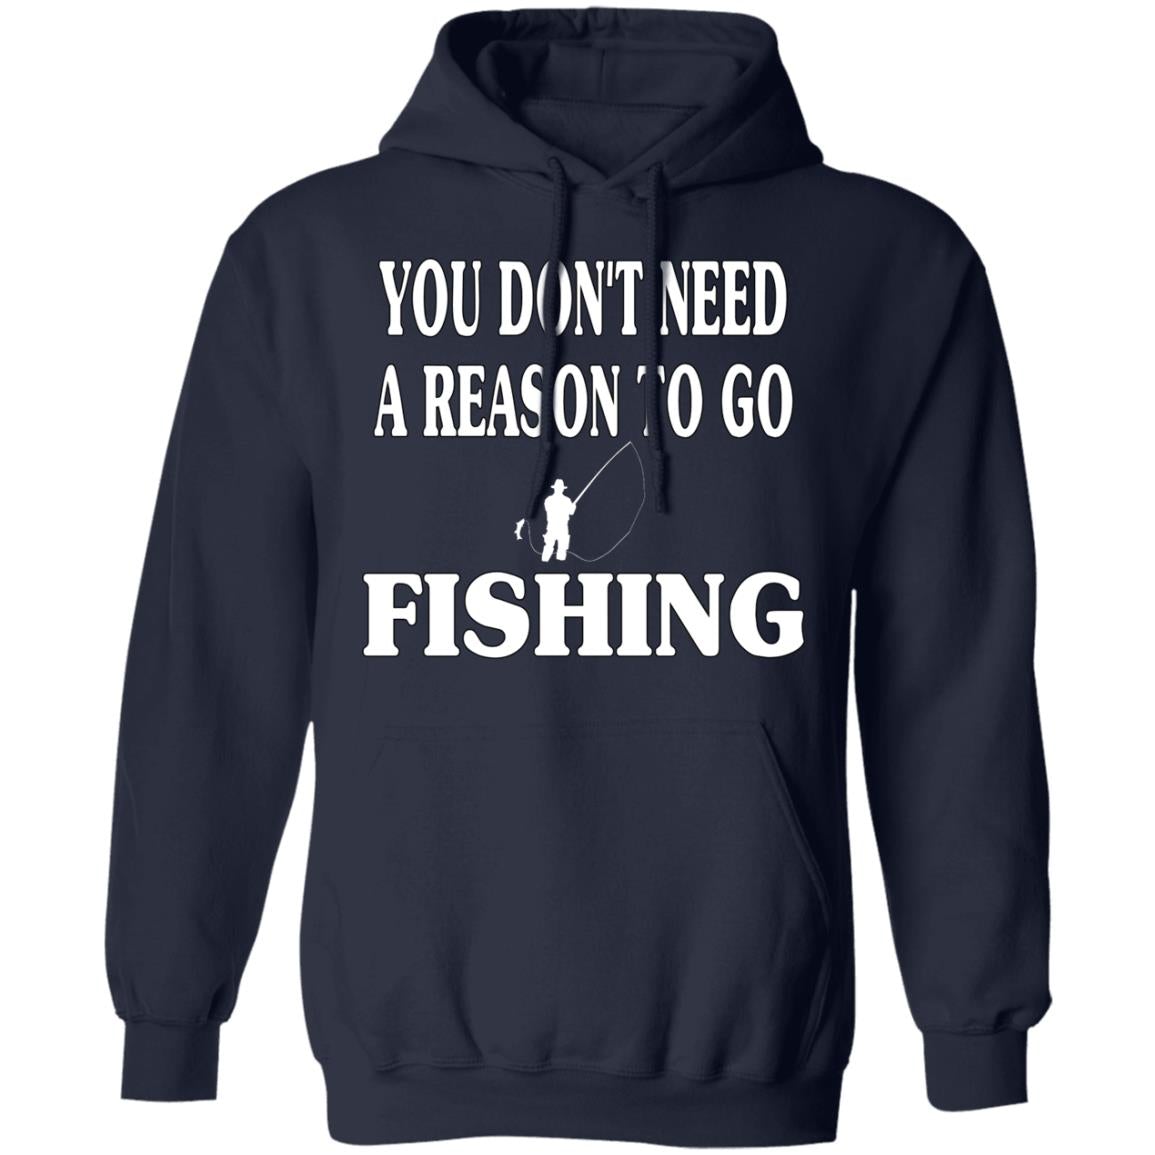 You don't need a reason to go fishing hoodie navy